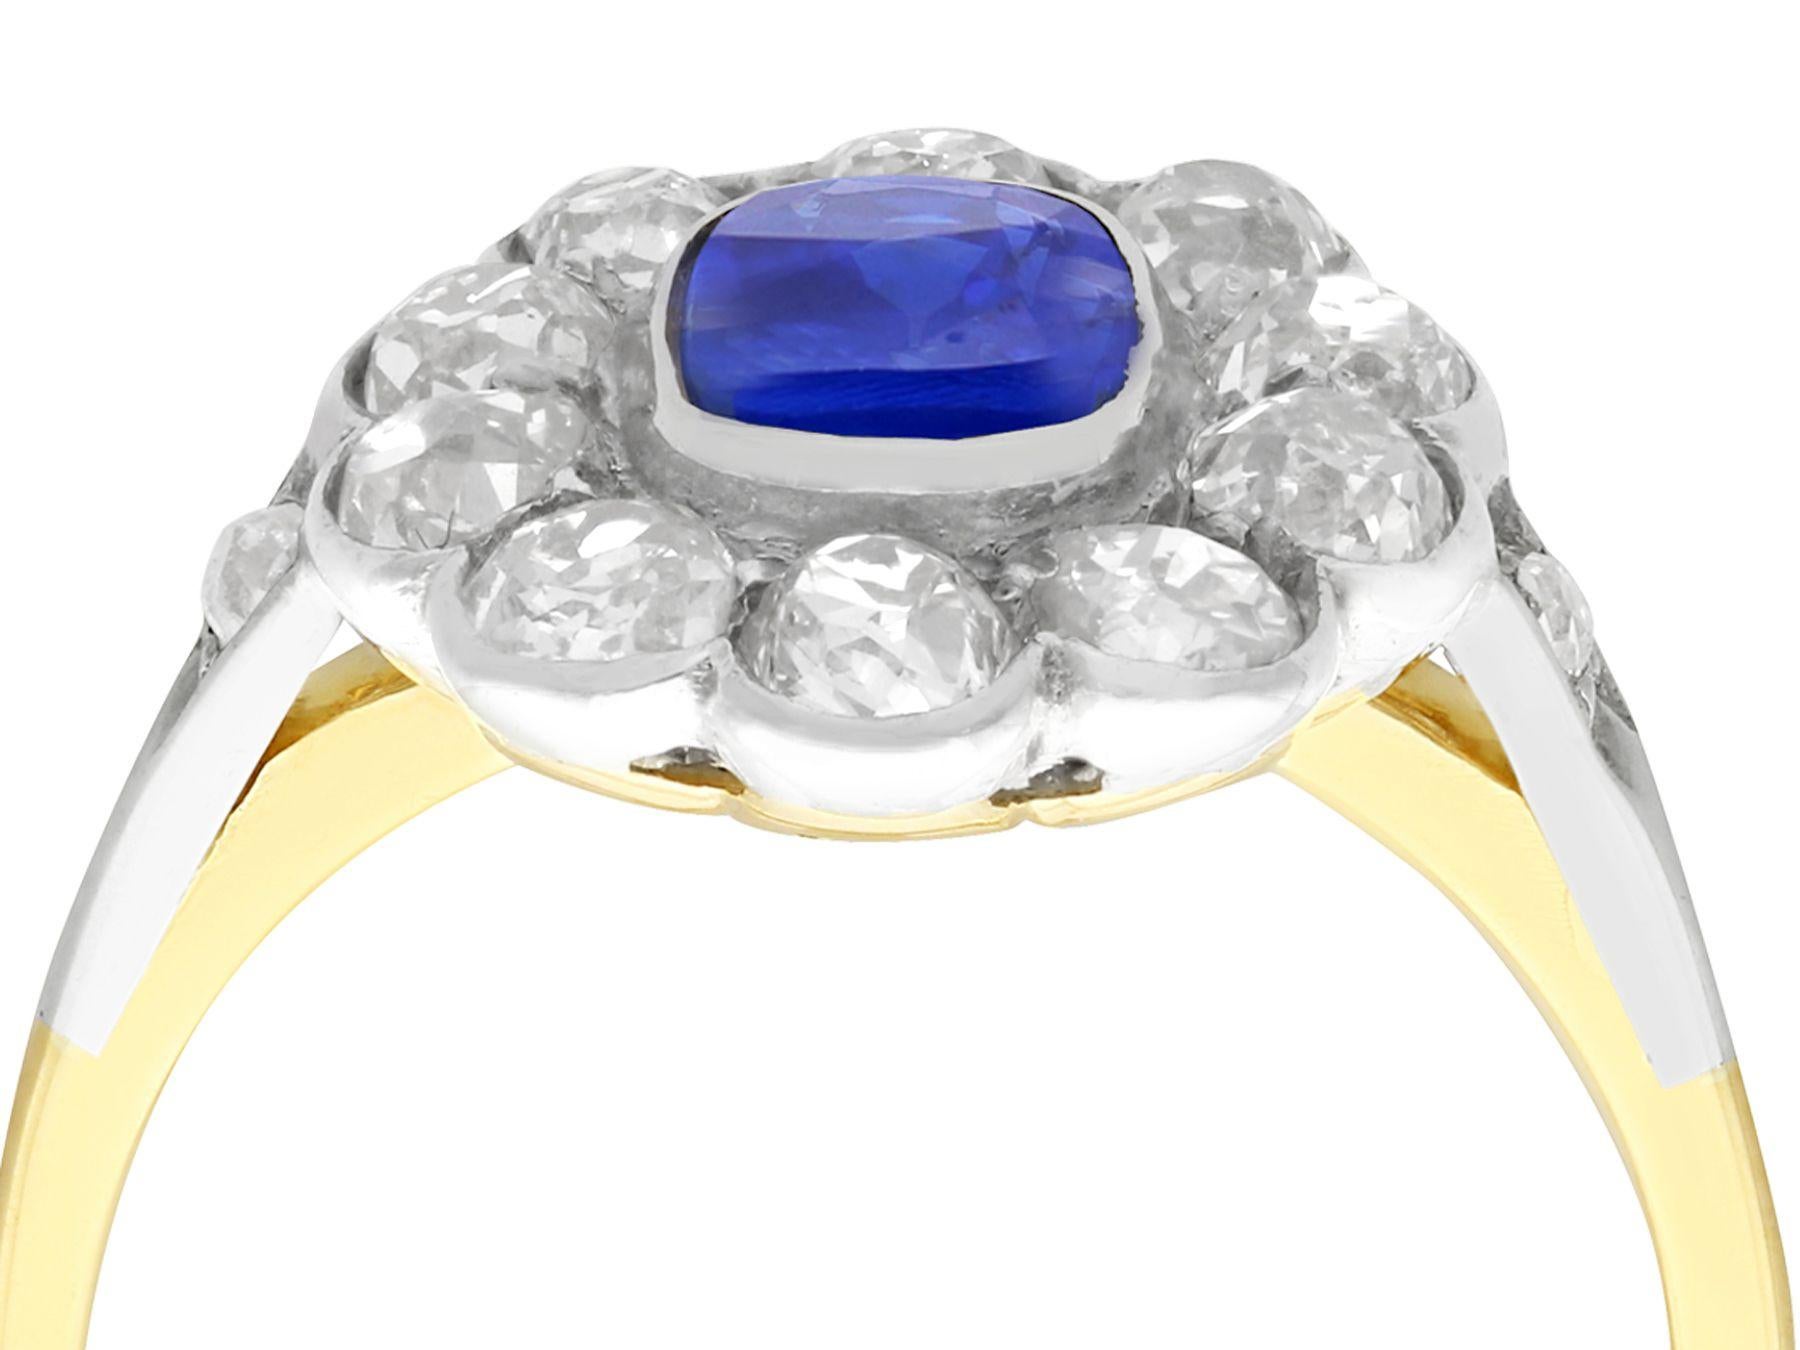 A stunning antique 1.28 carat sapphire and 1.65 carat diamond, 14 karat yellow gold and silver set cocktail ring; part of our diverse antique jewelry collections.

This stunning, fine and impressive sapphire ring has been crafted in 14k yellow gold